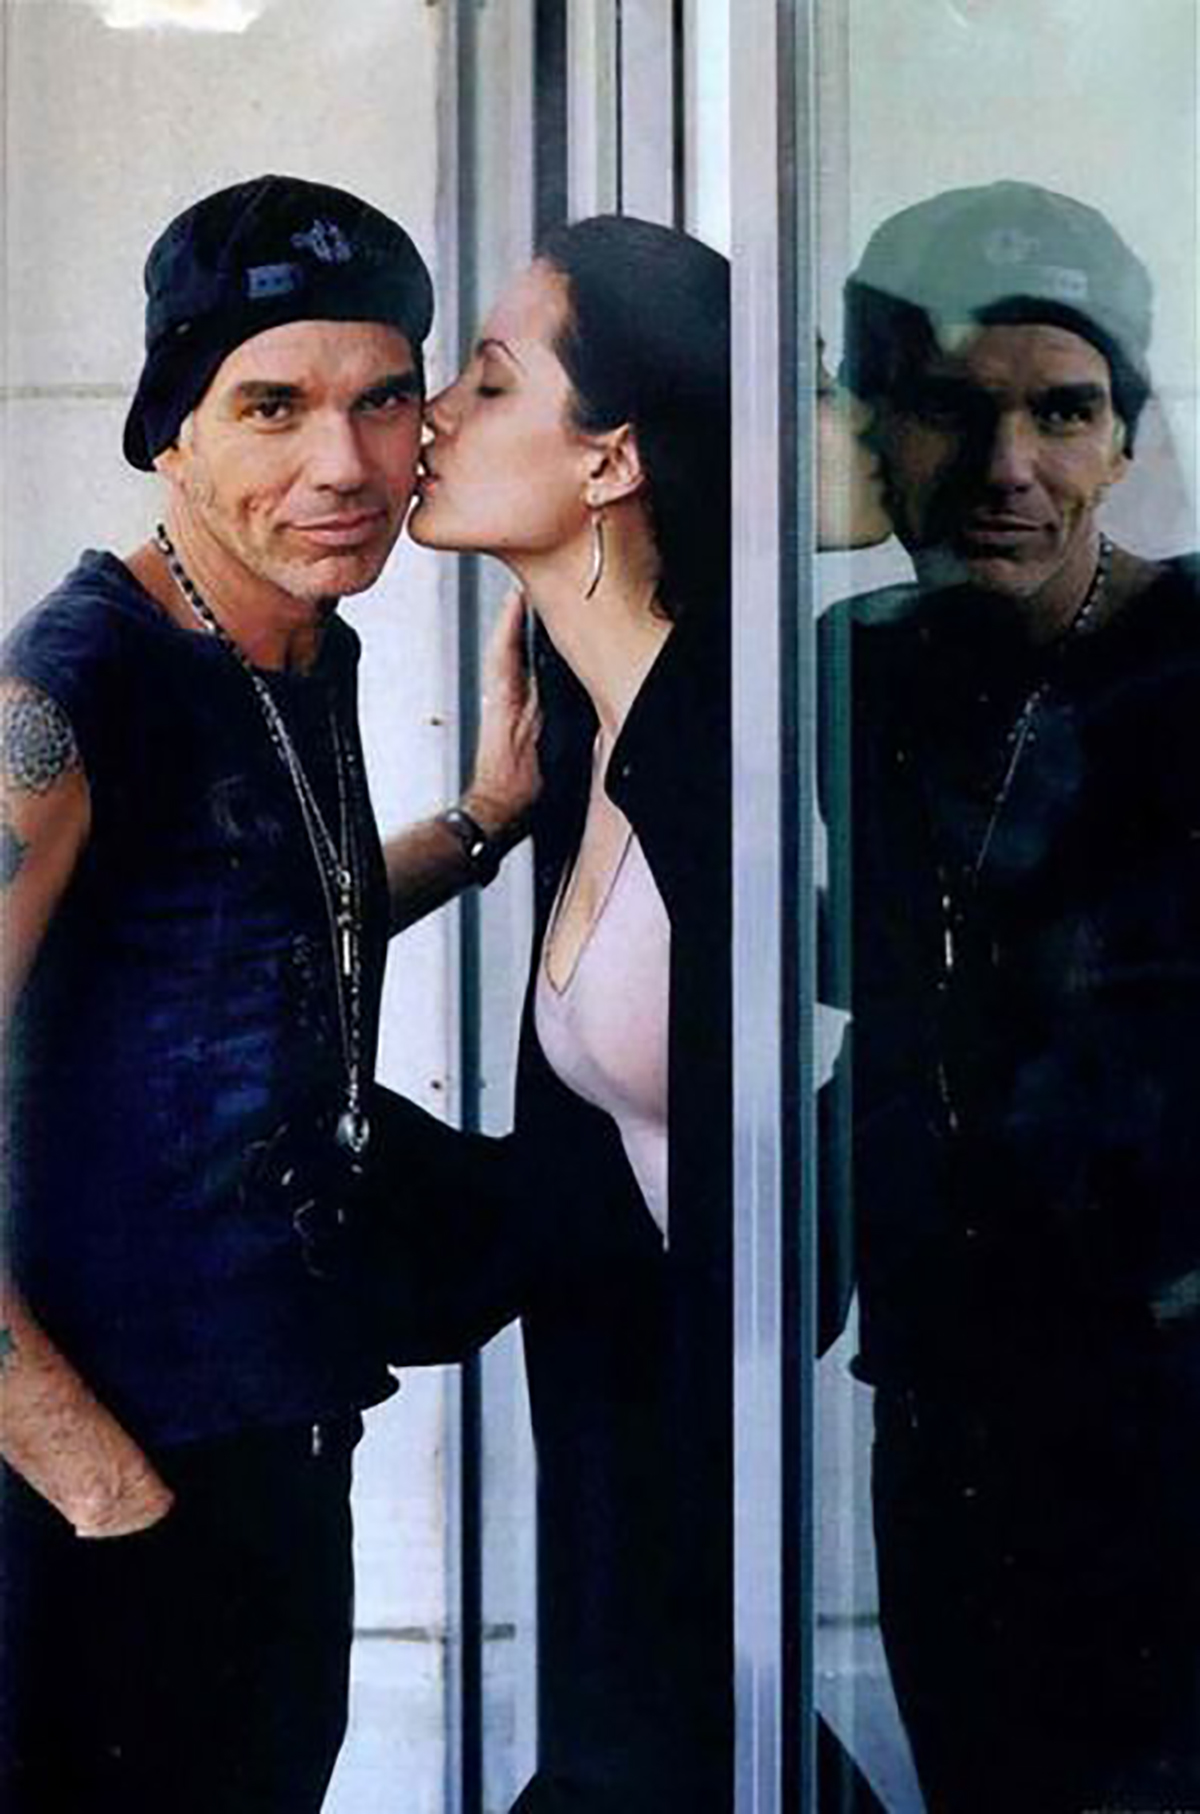 Billy Bob Thornton getting a kiss from his then wife Angelina Jolie in 2001.